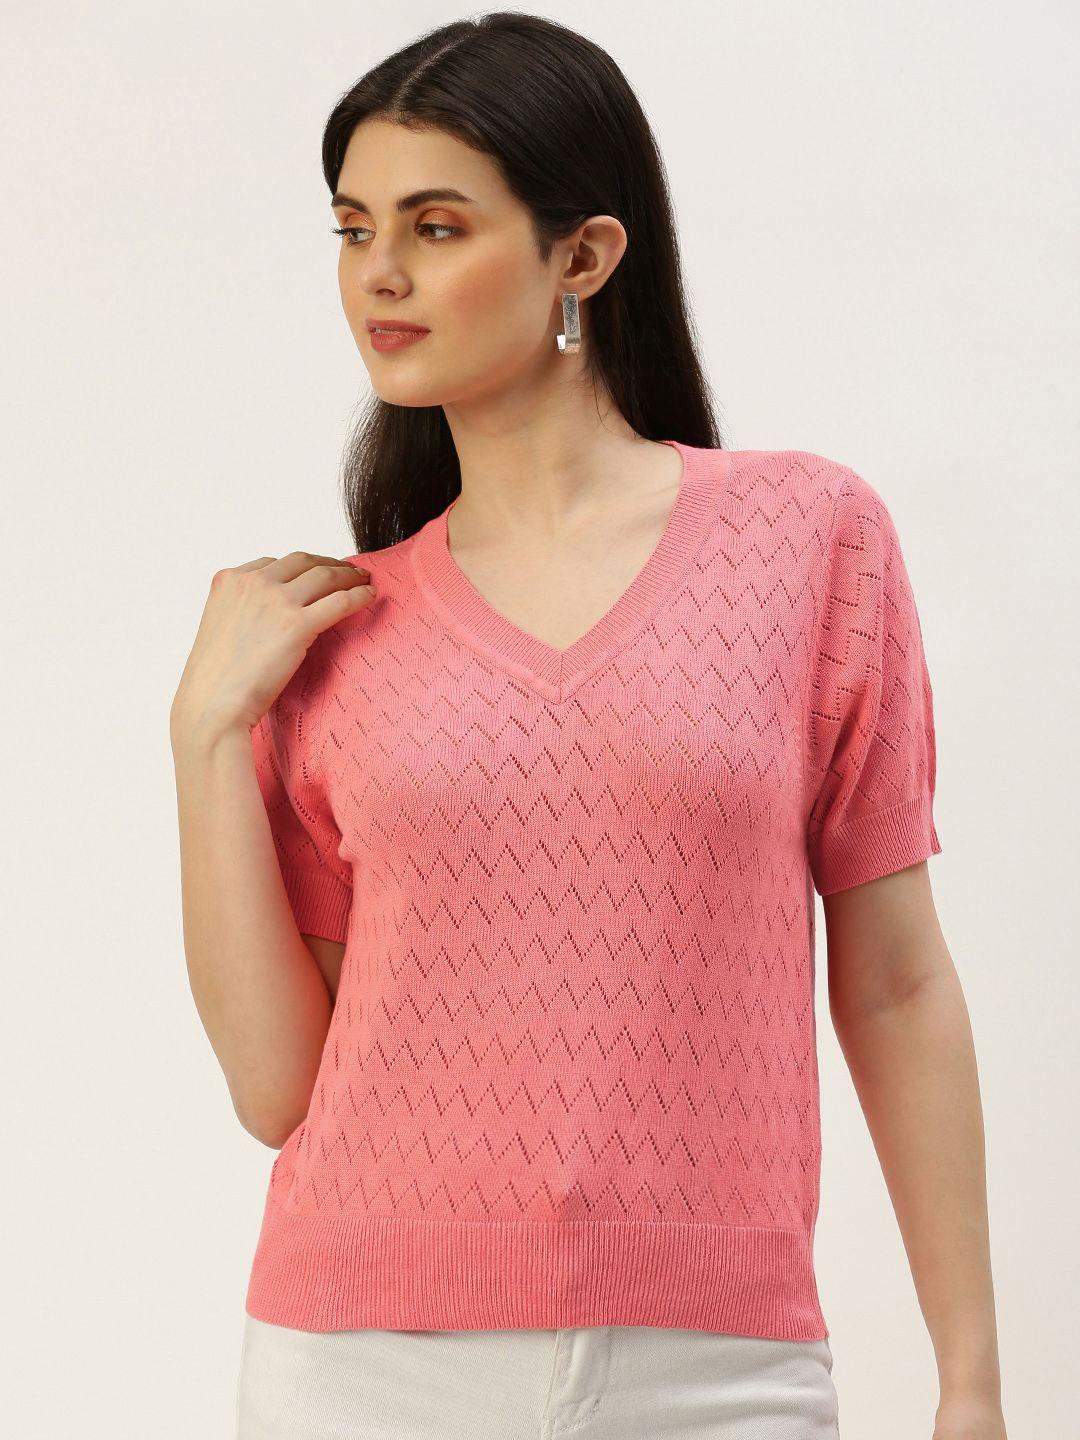 and v-neck knitted self design short sleeves top